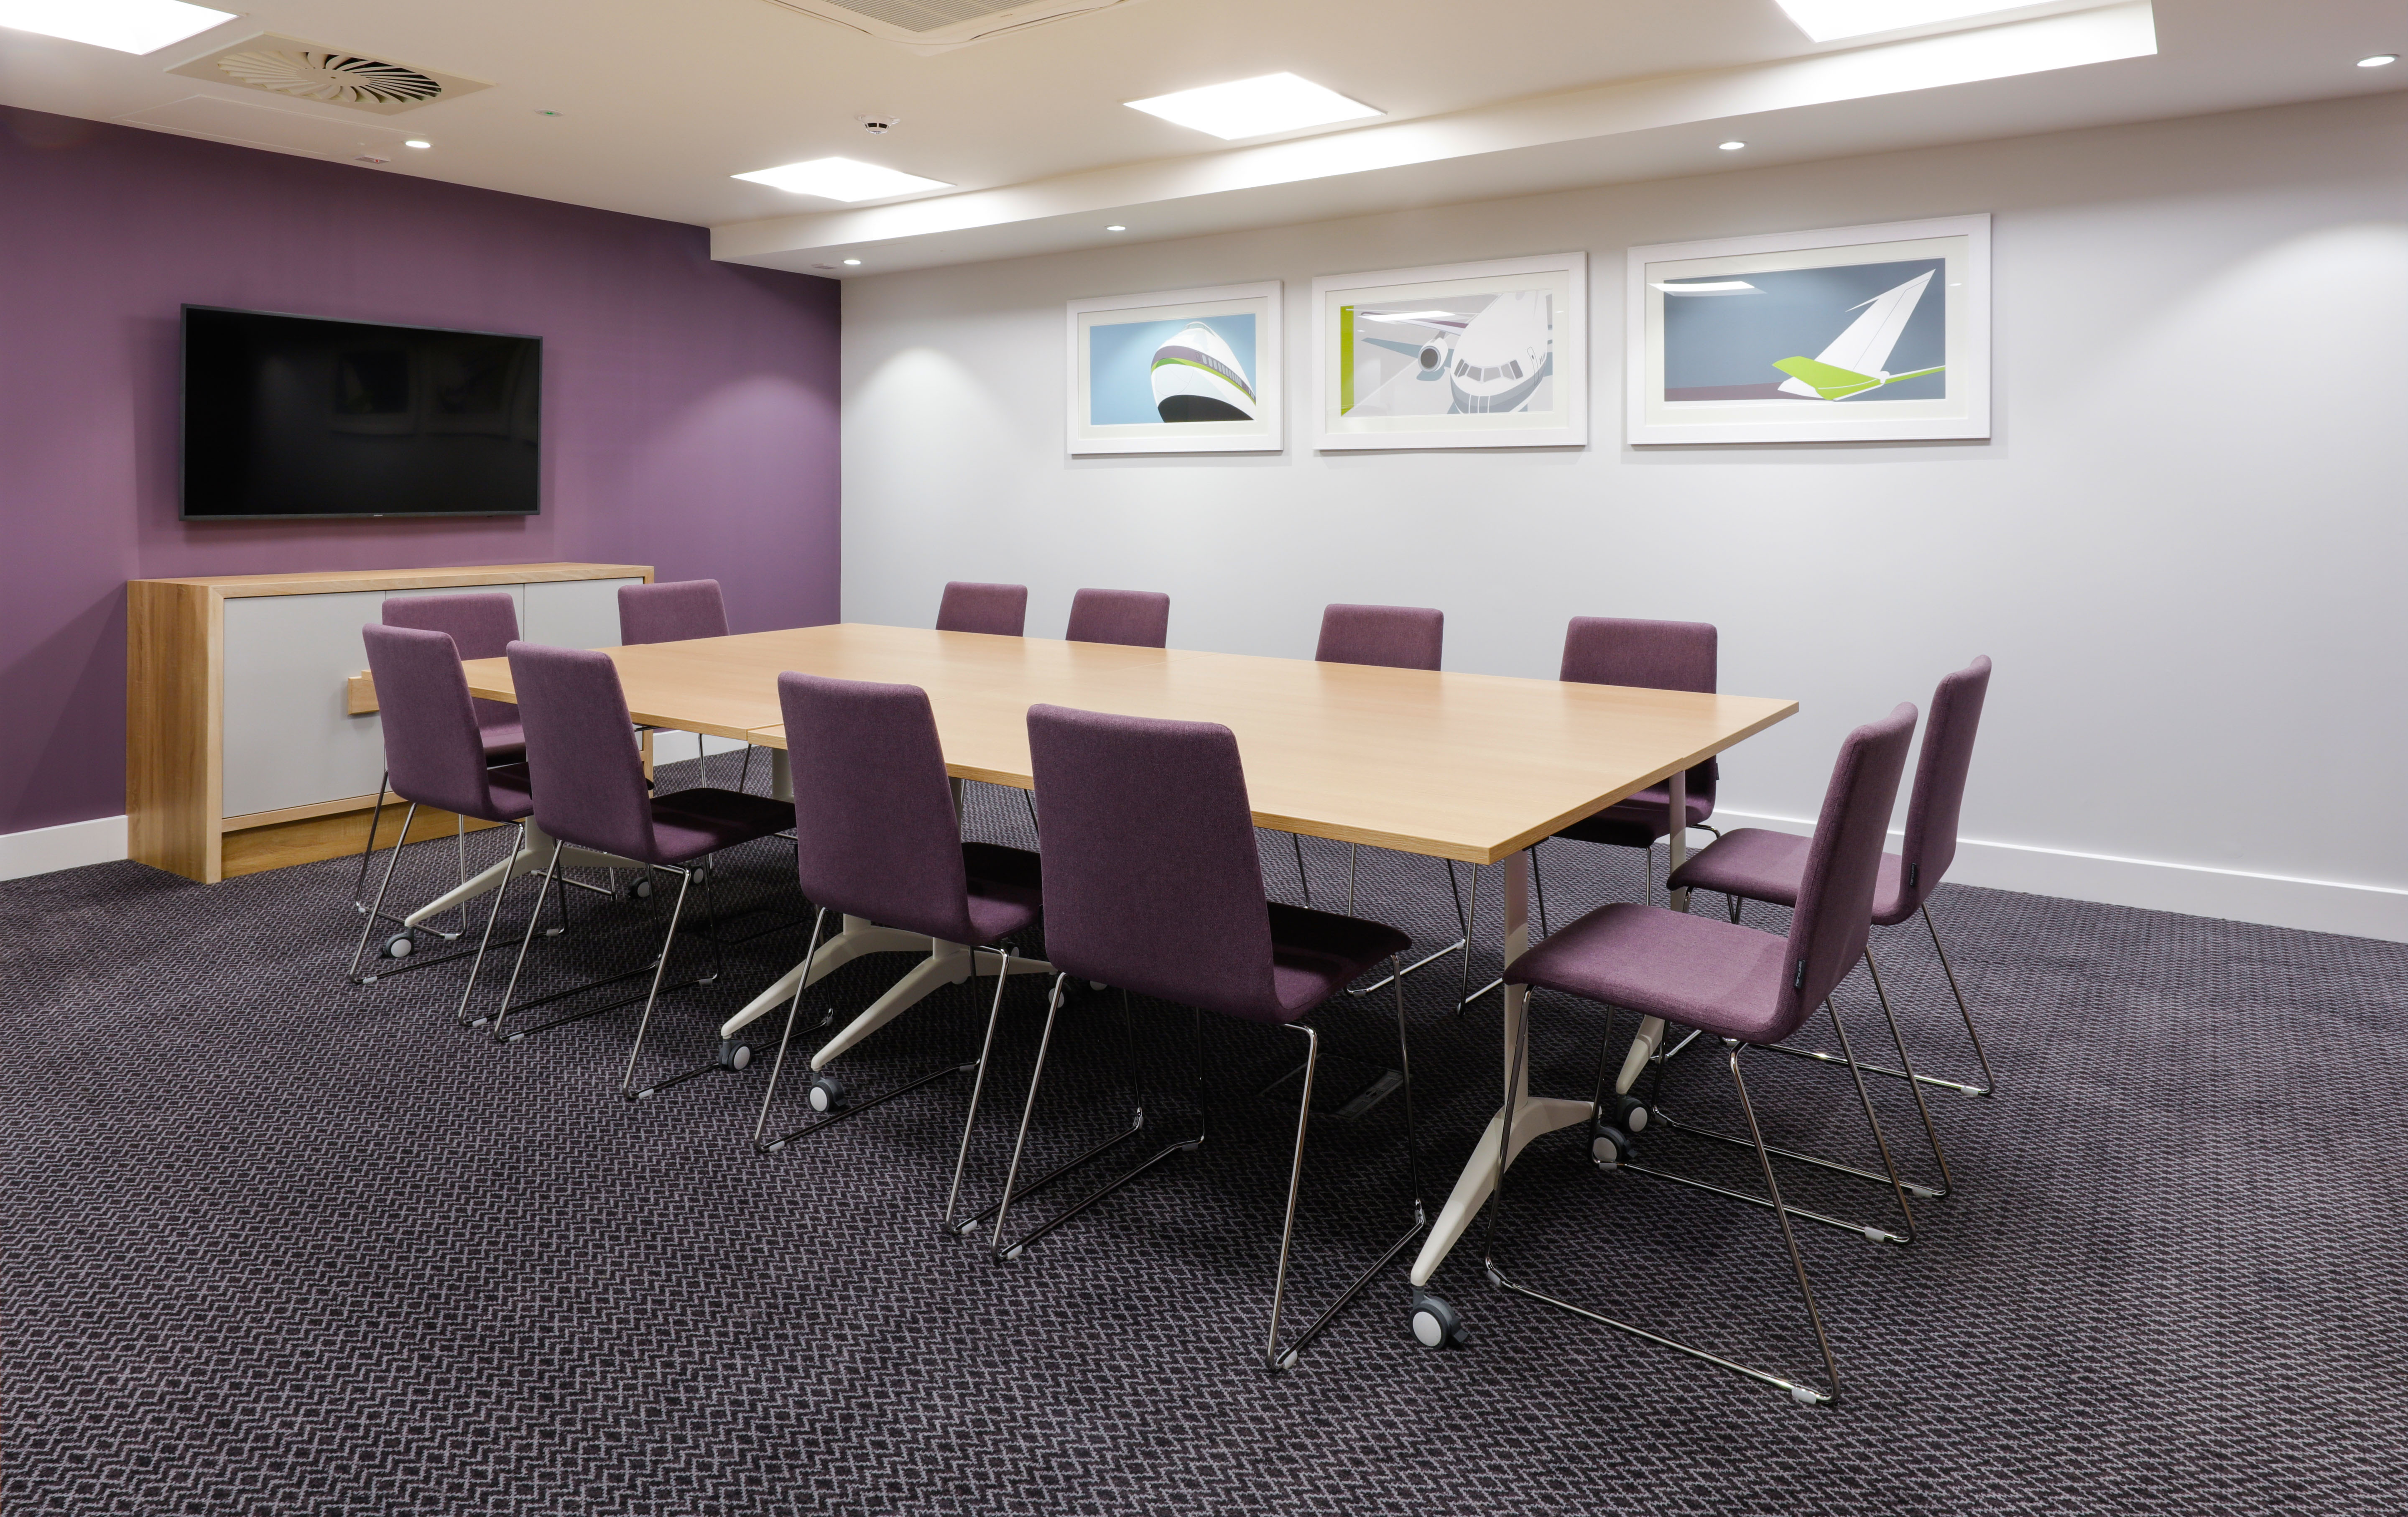 Meeting Room with Conference Table and Wall Mounted Television